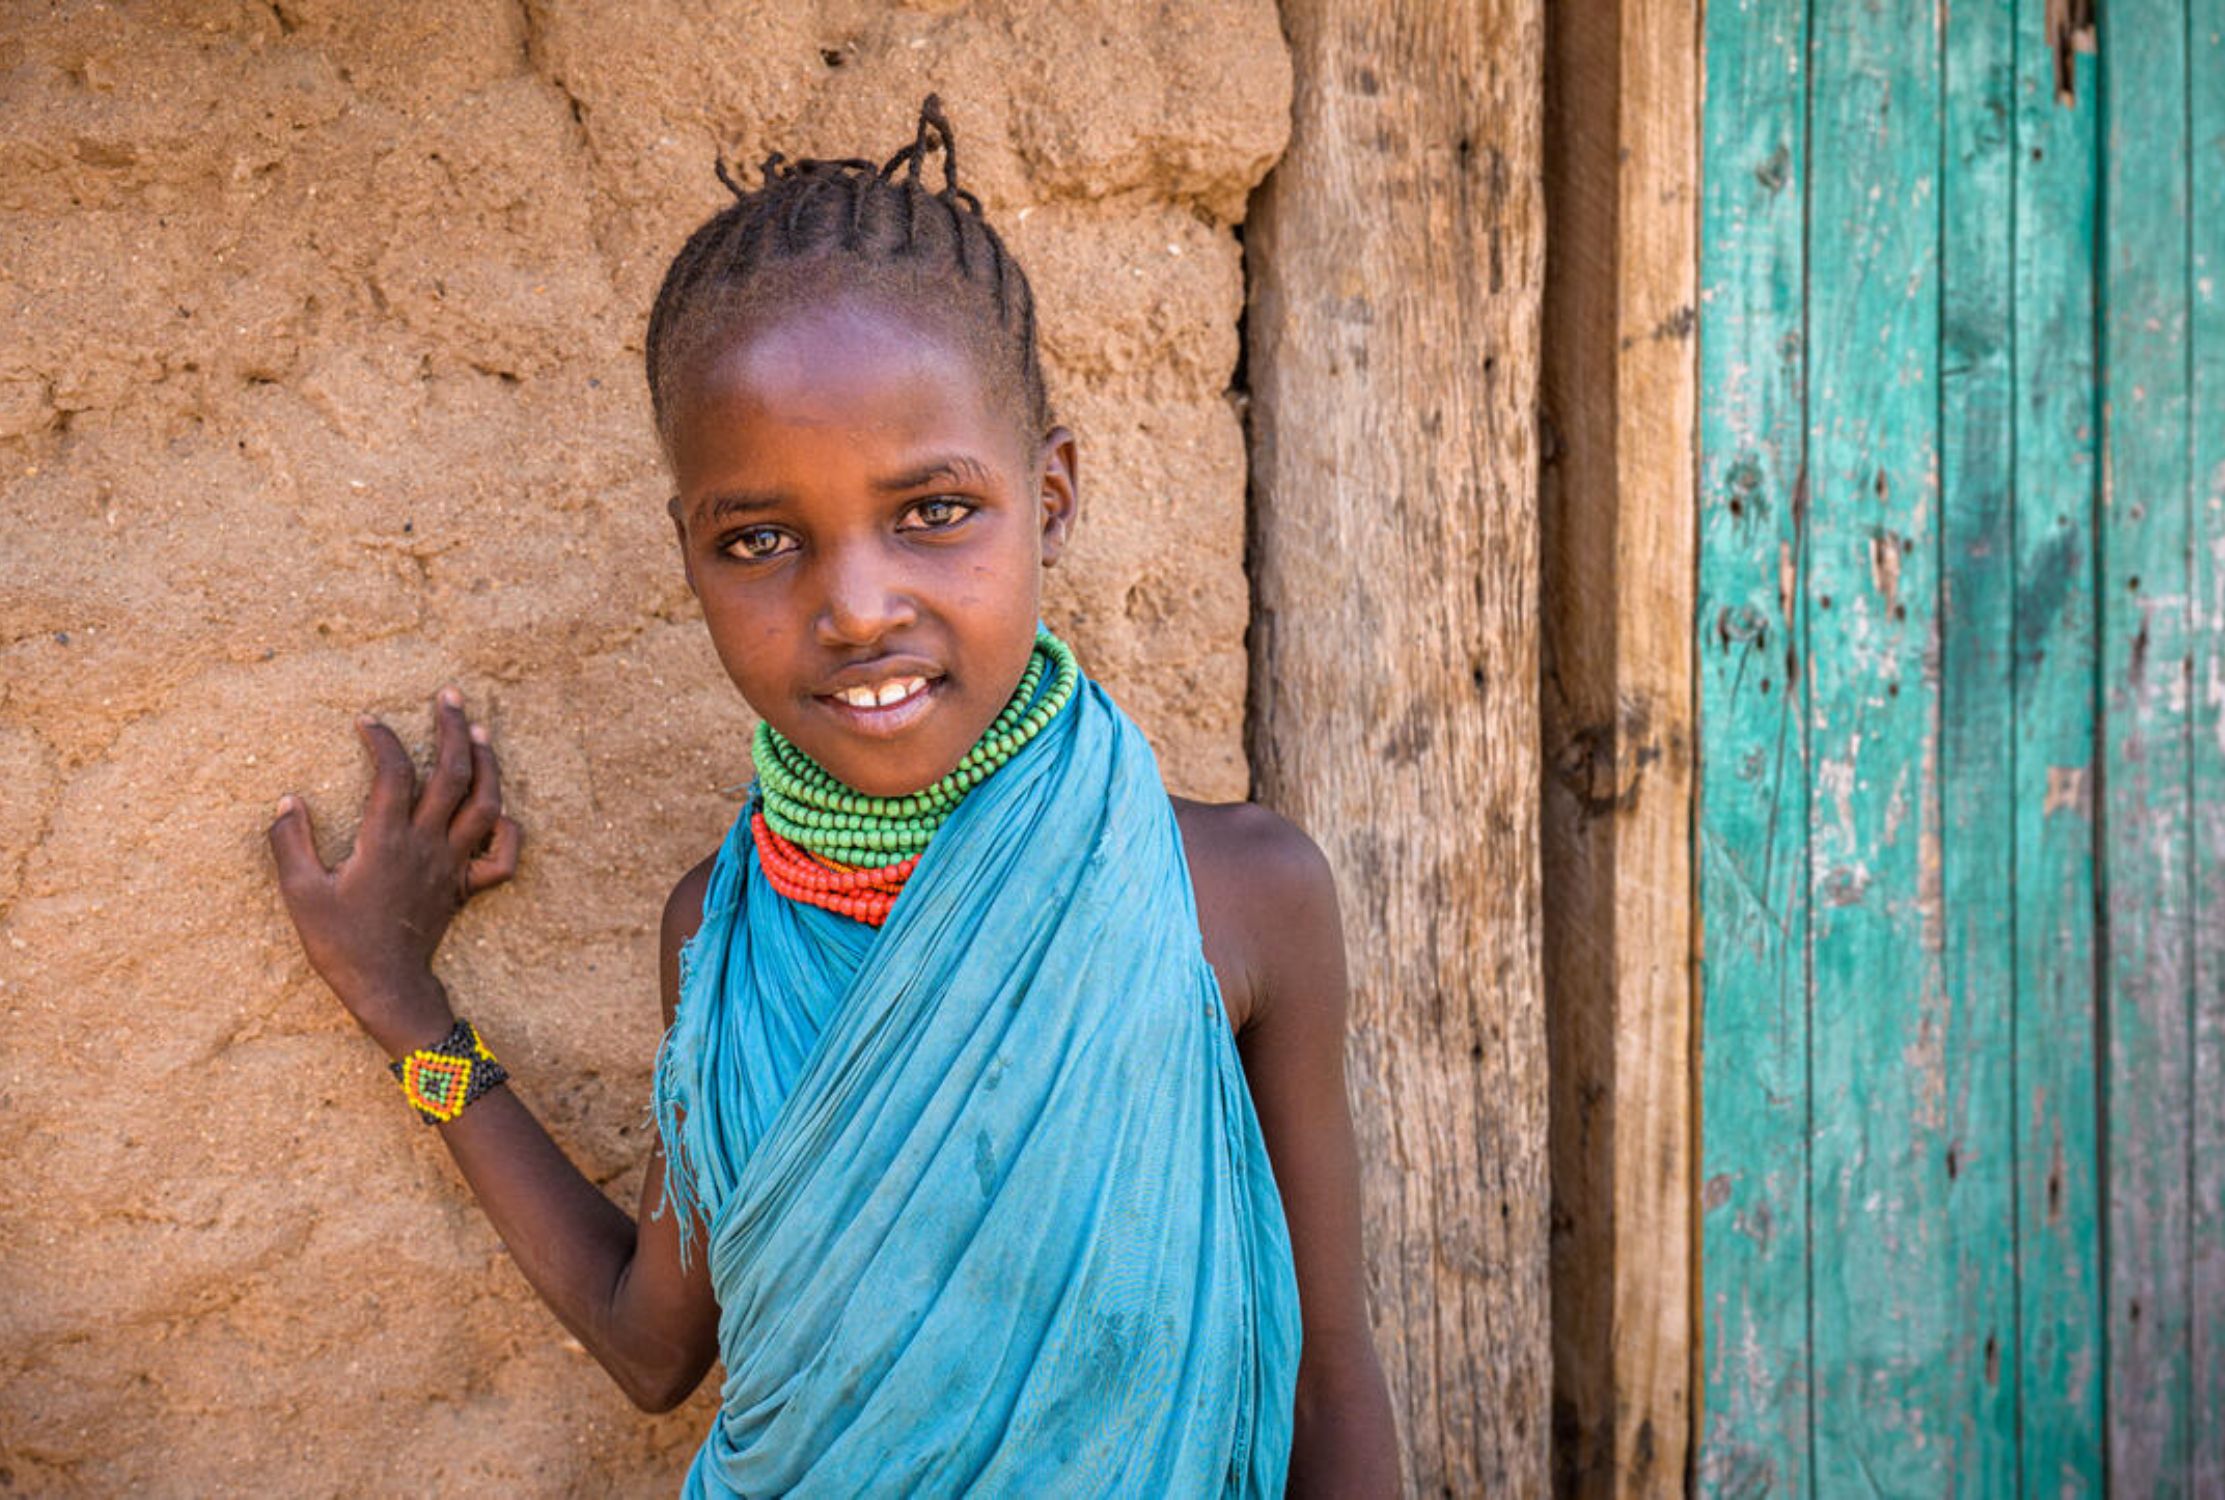 Seven-year-old Kenyan girl stands outside her home smiling